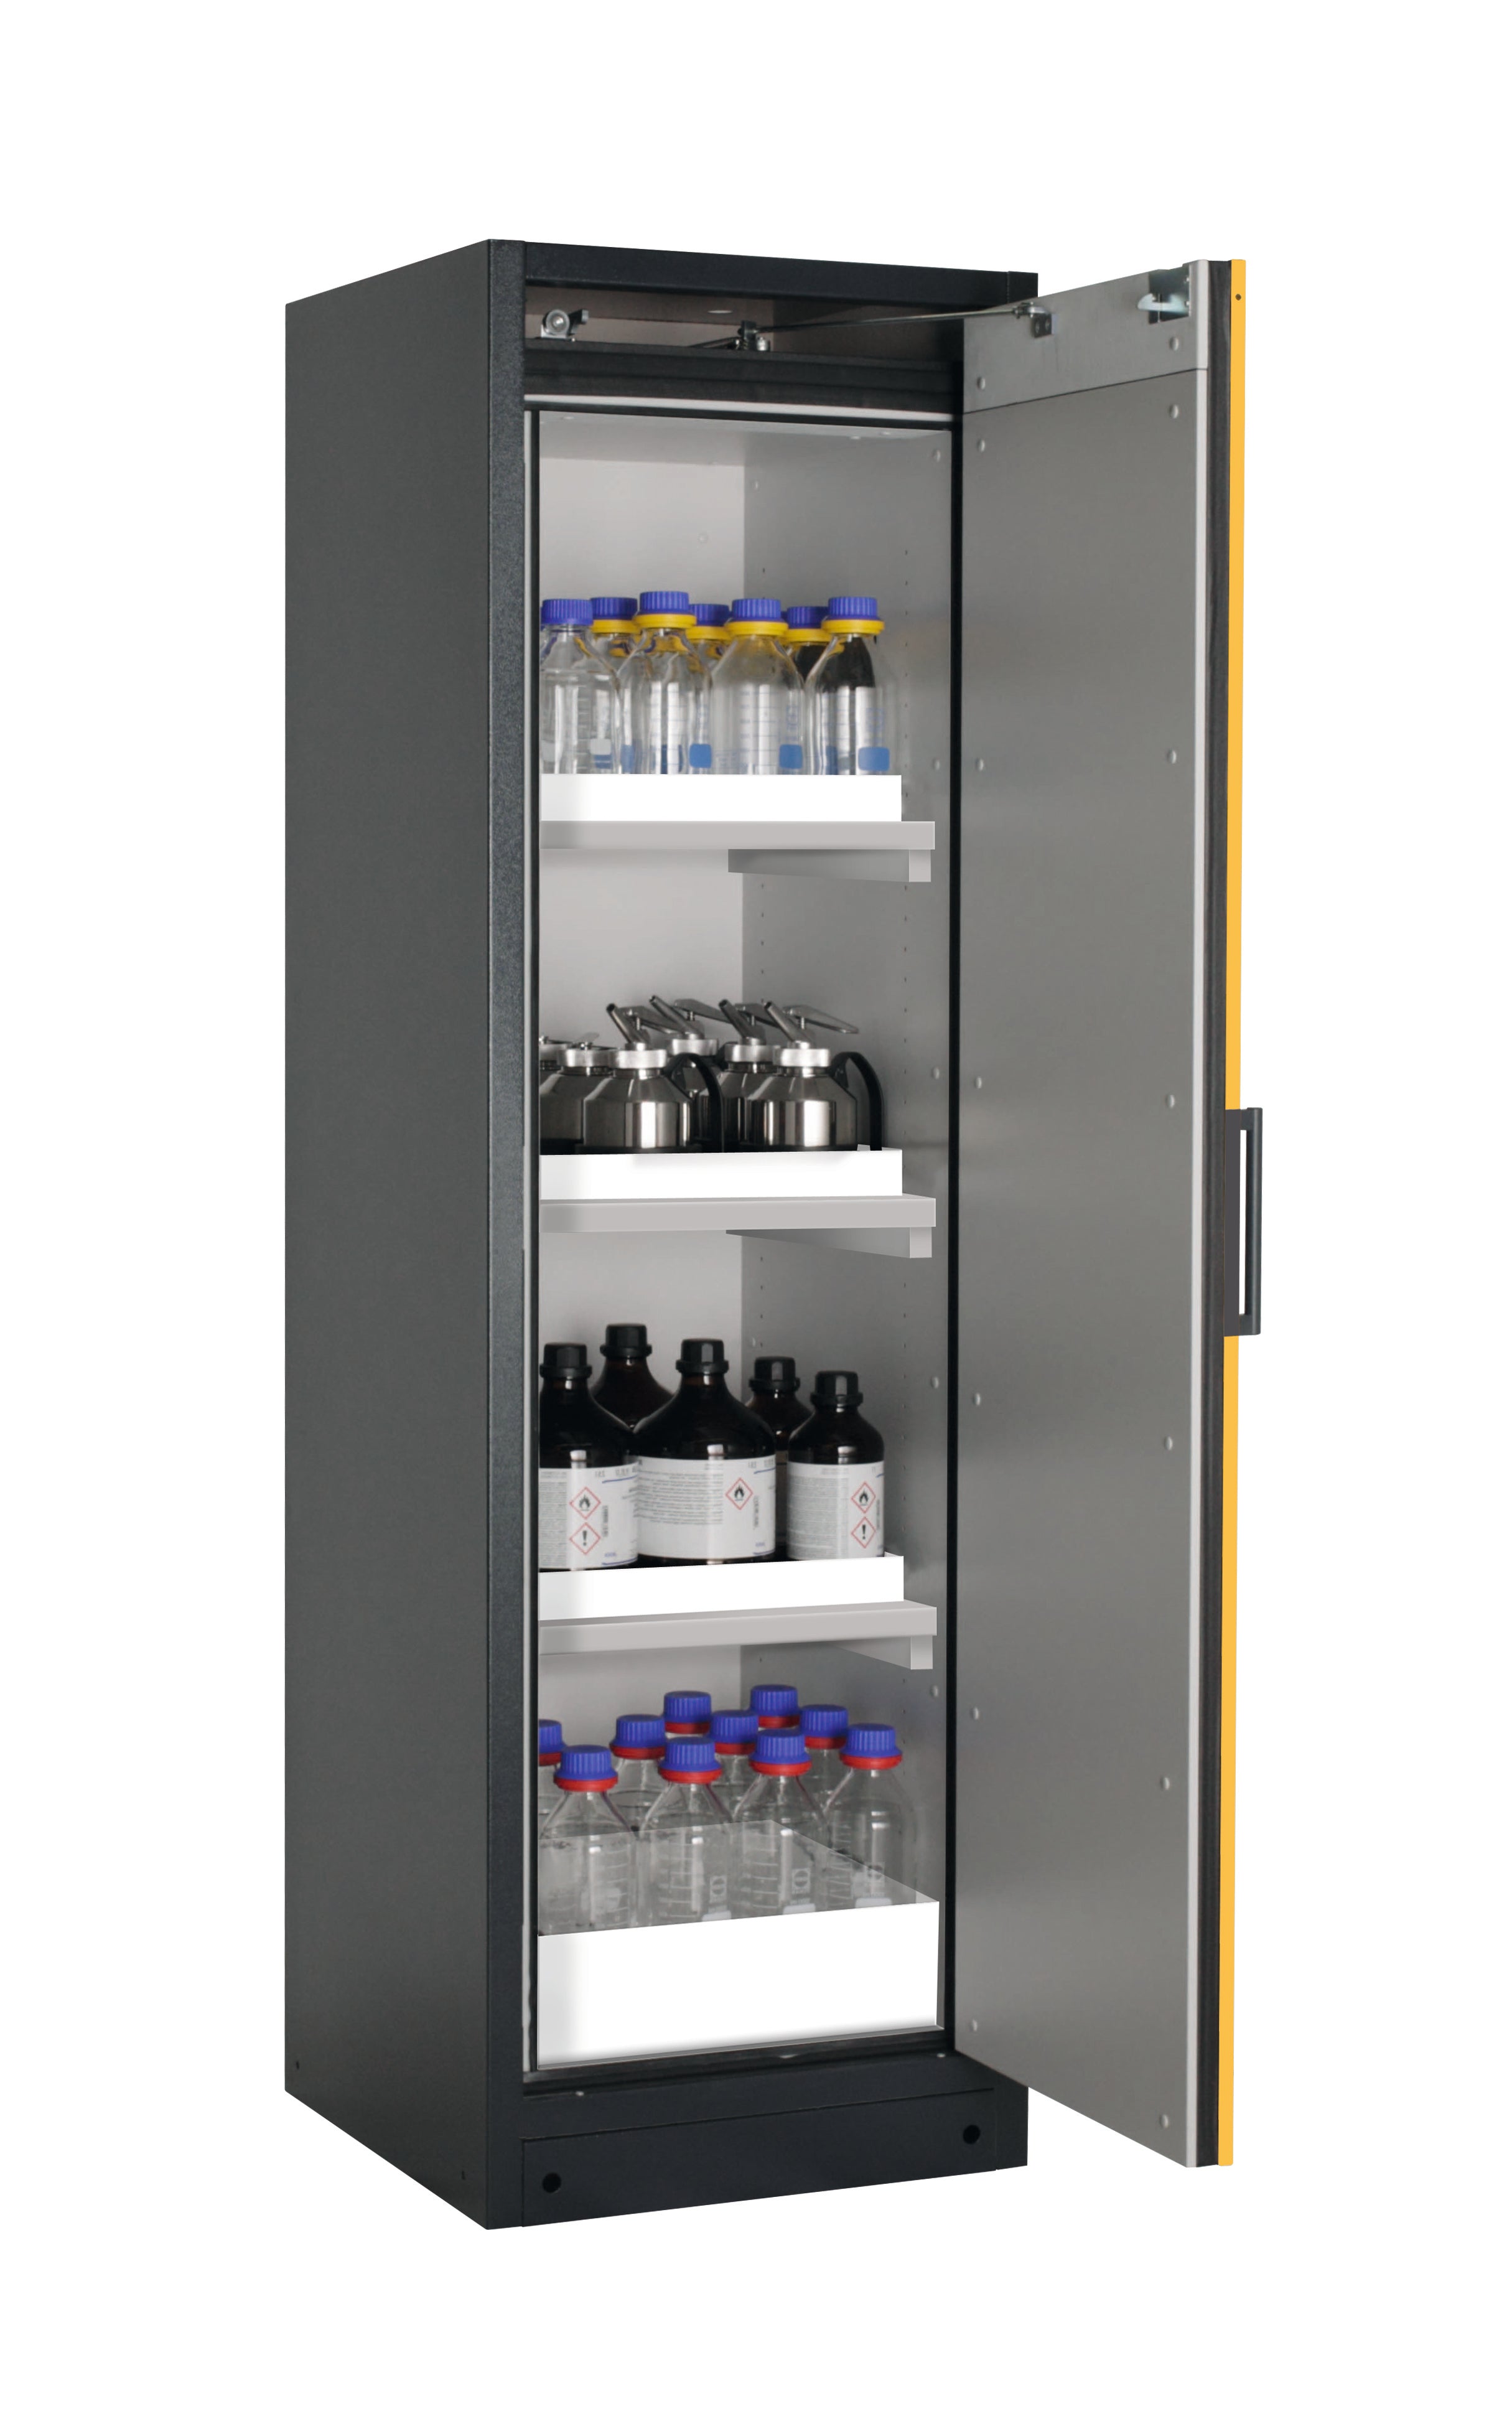 Type 90 safety storage cabinet Q-CLASSIC-90 model Q90.195.060.R in warning yellow RAL 1004 with 3x tray shelf (standard) (polypropylene),